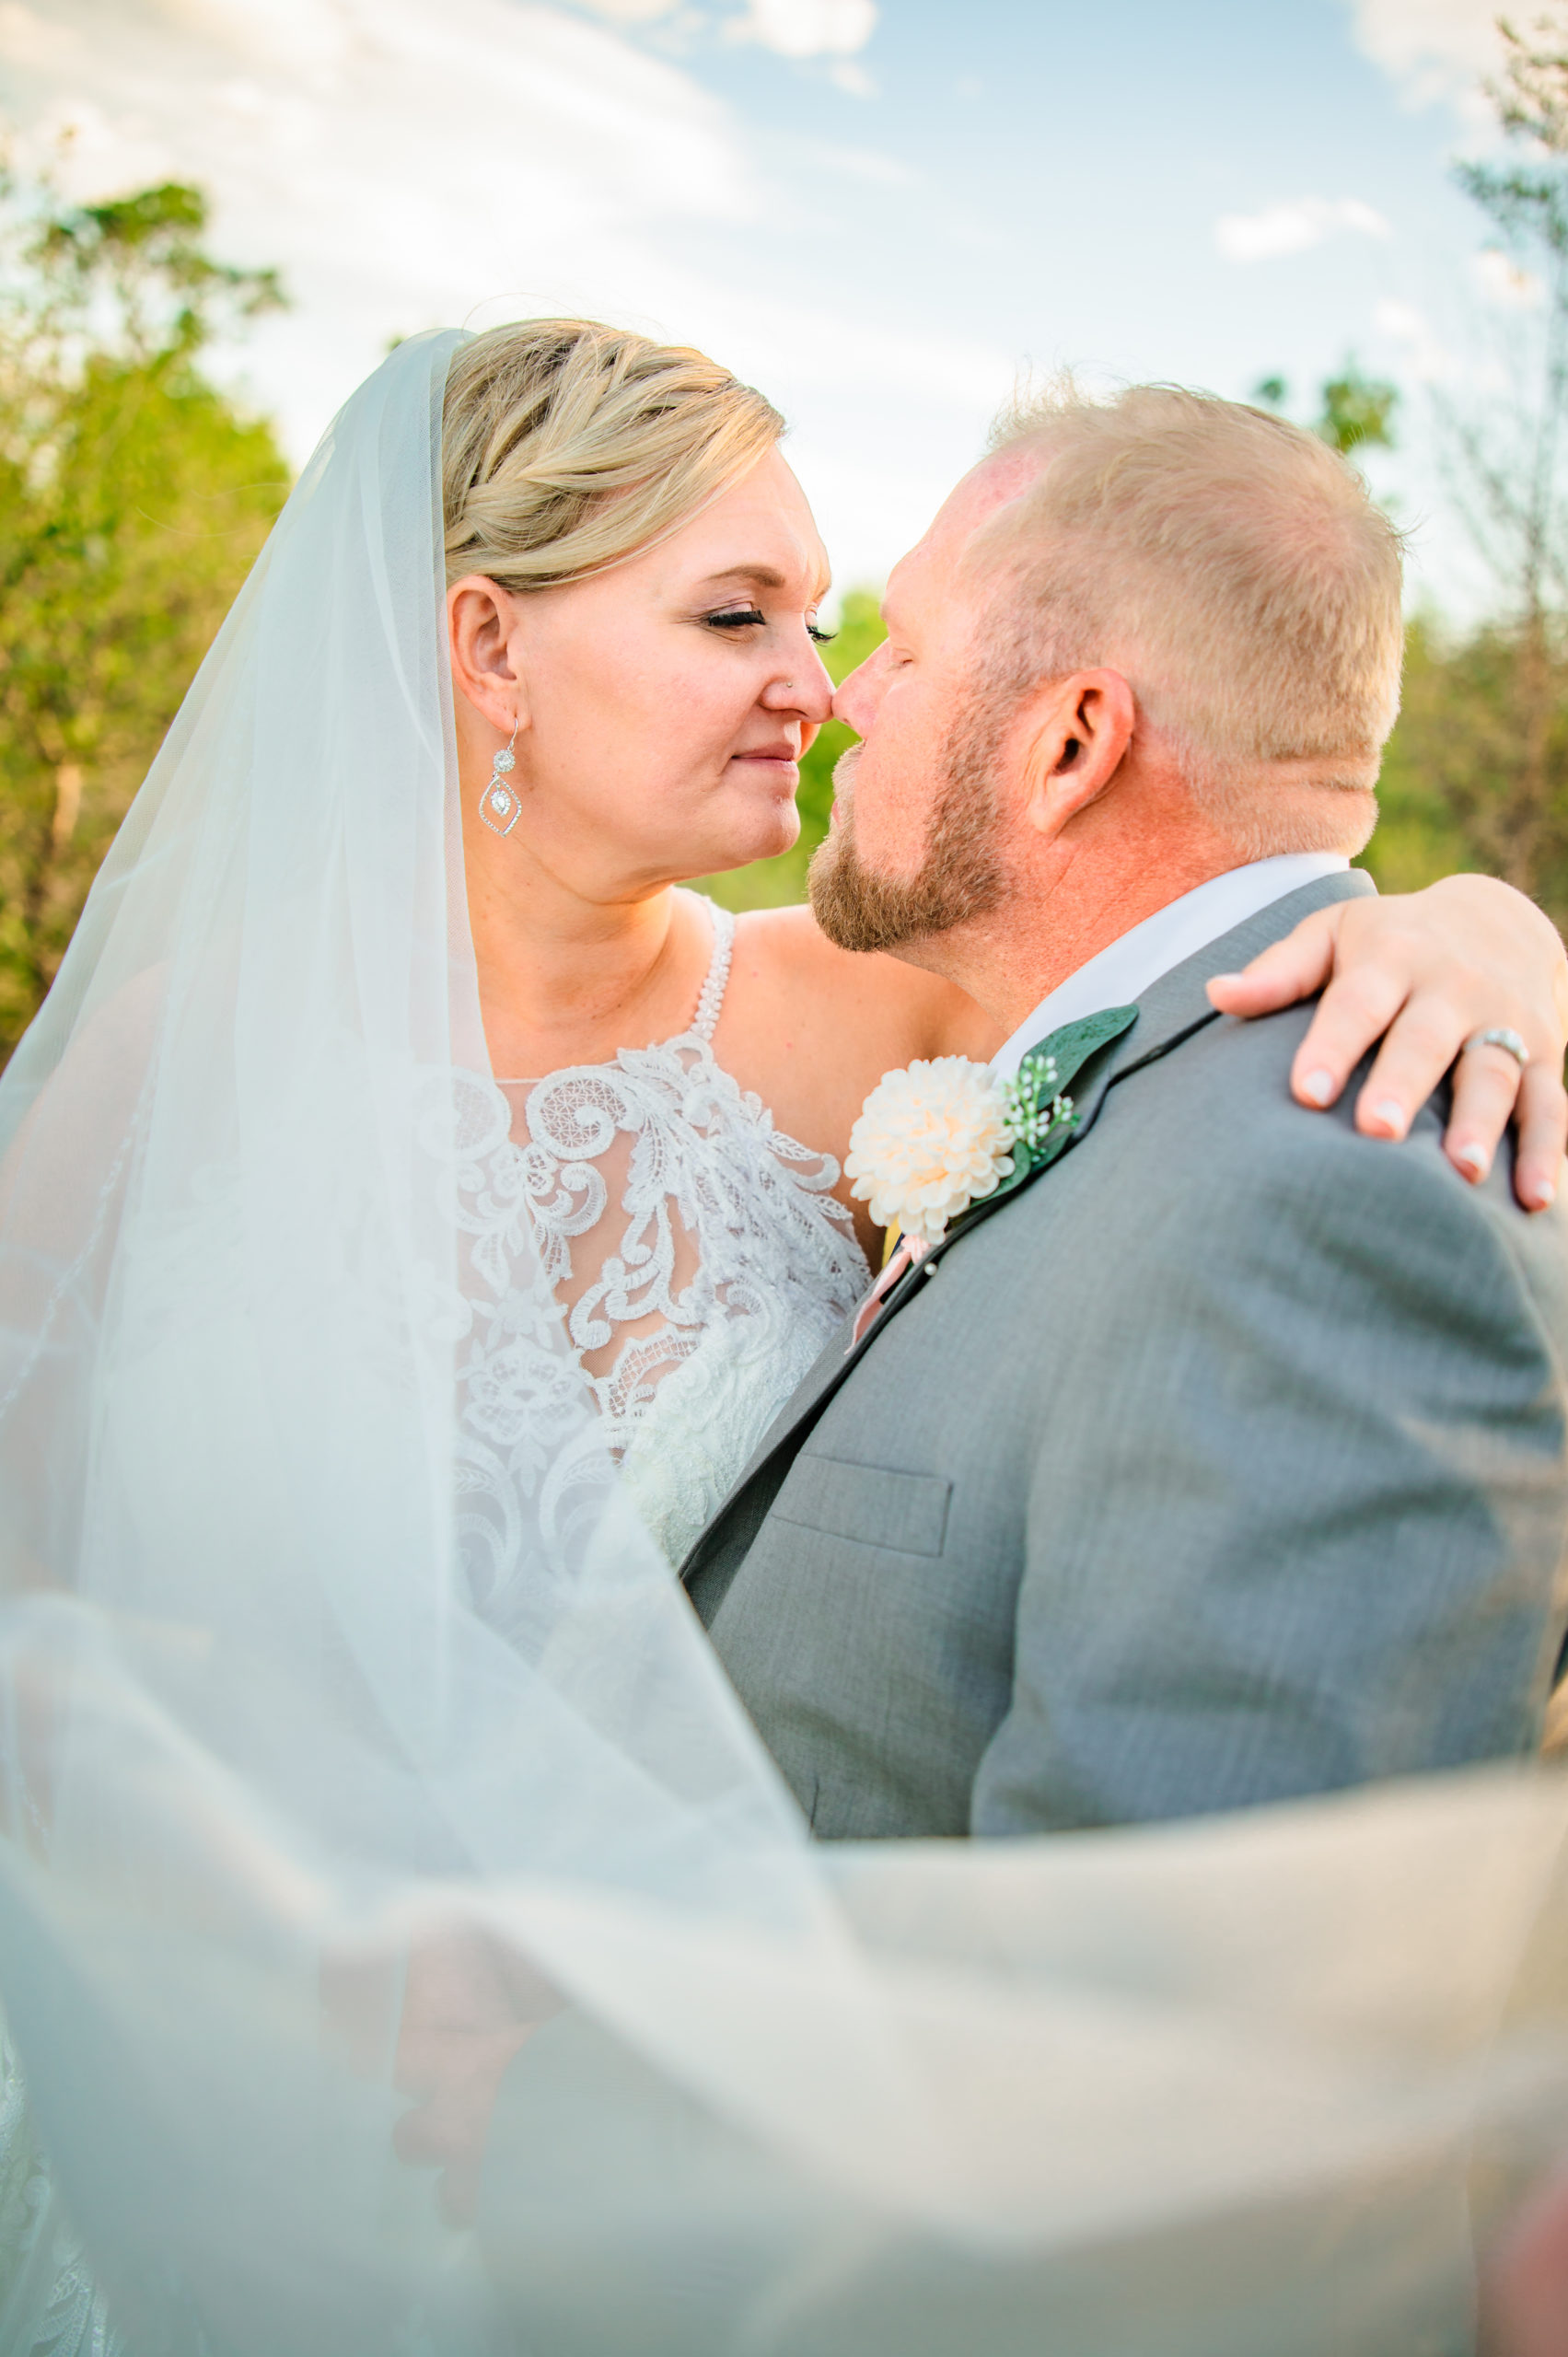 Pocatello wedding photographer captures bride sitting on grooms lap and holding her arm around his shoulder while their noses touch